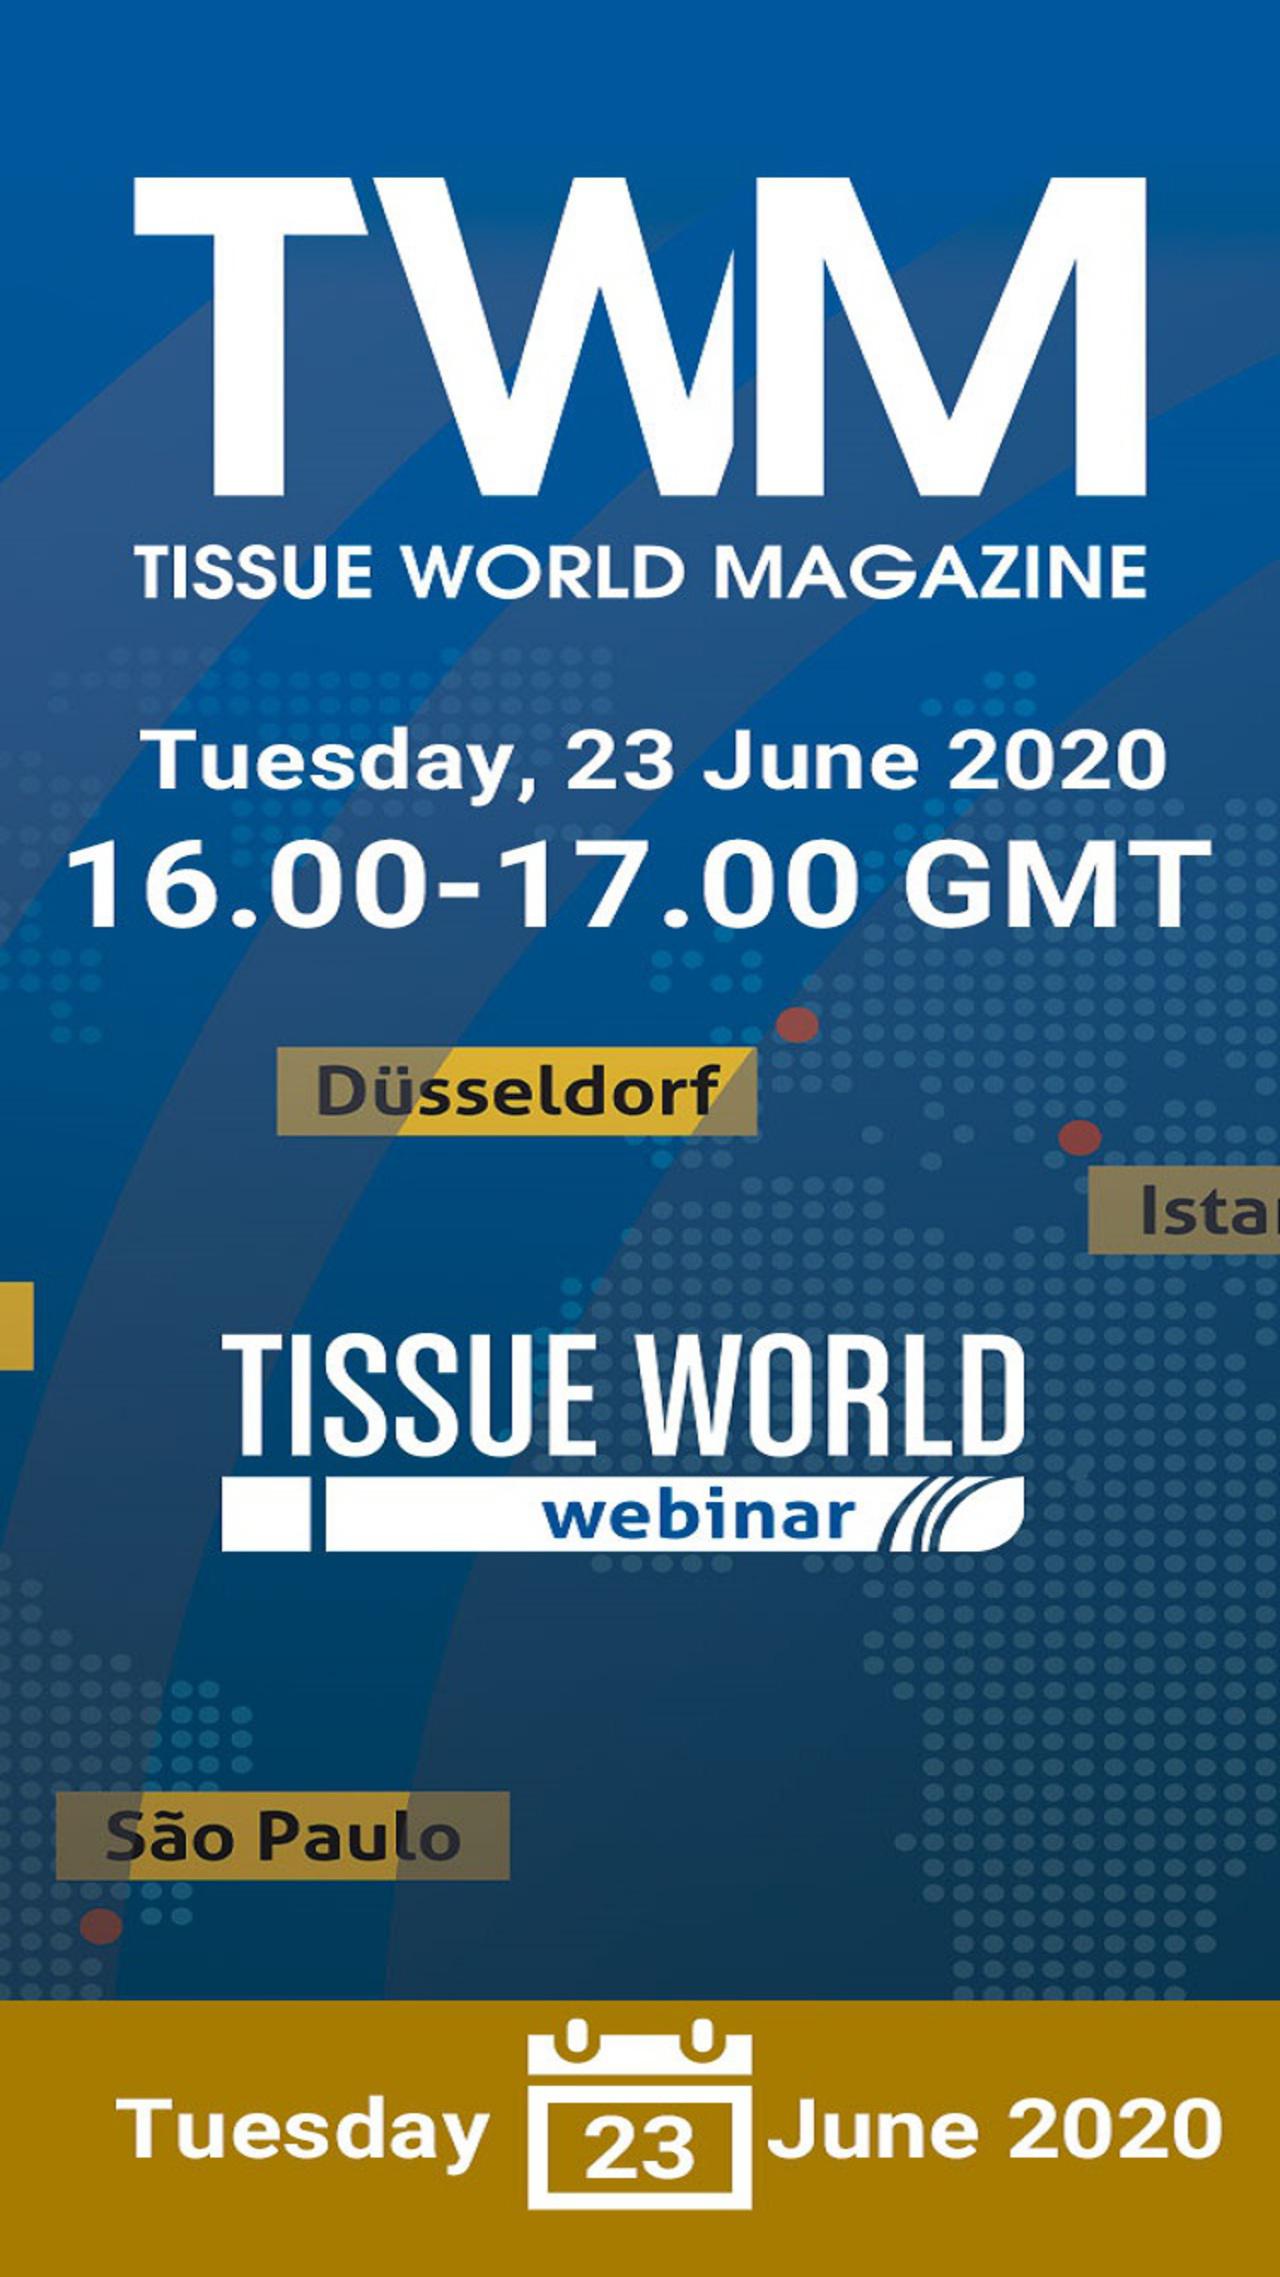 Join us for the first Tissue World Webinar on June 23rd